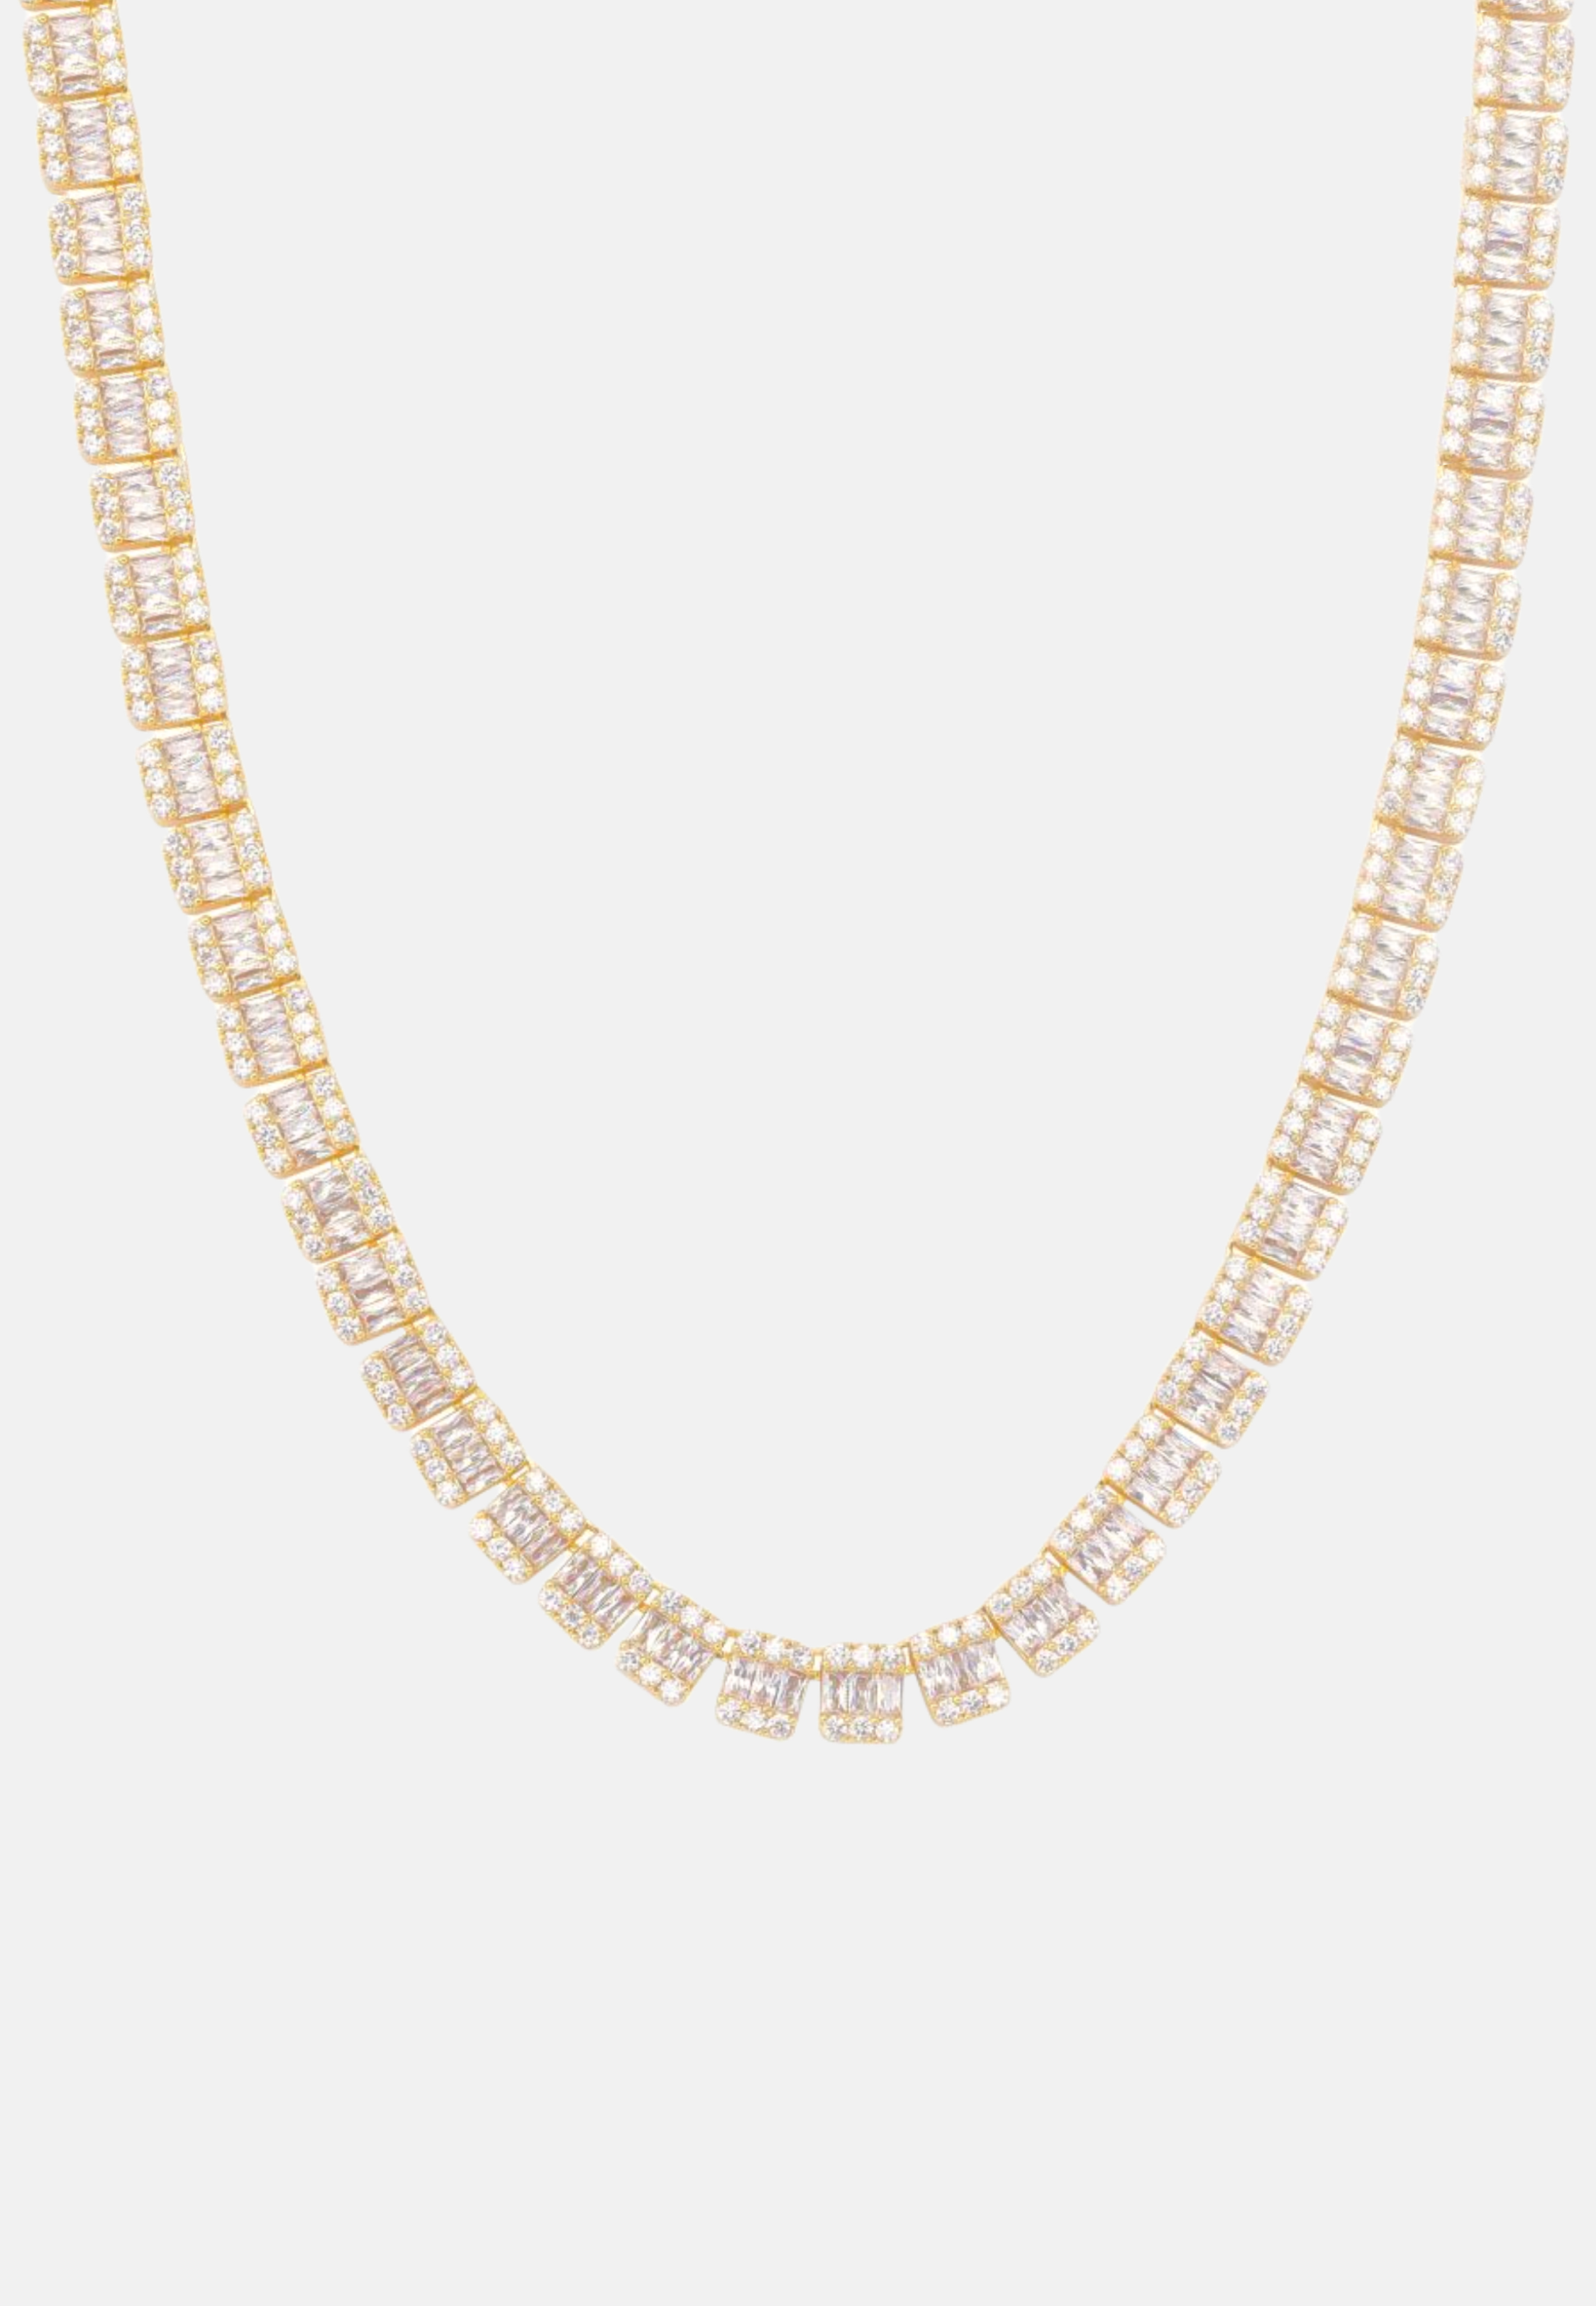 Hillenic Gold 9mm Iced Oval Tennis Chain